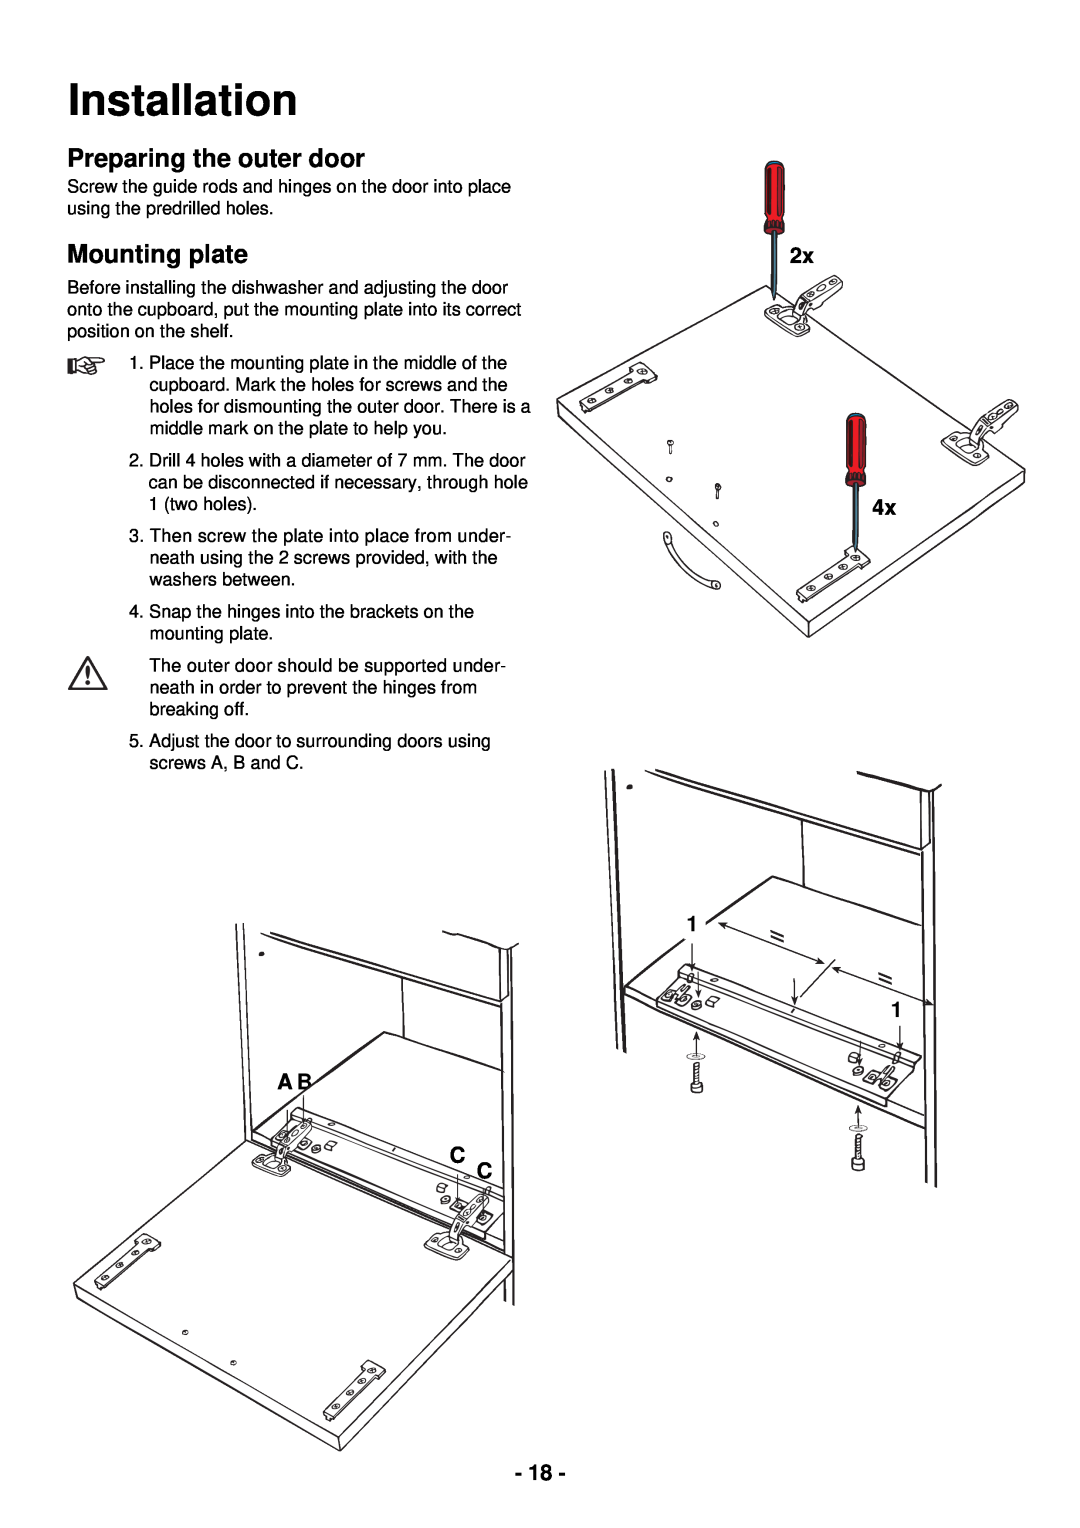 Zanussi ZDC 5465 manual Preparing the outer door, Mounting plate, 2x 4x, A B C, 1 1 C, Installation 